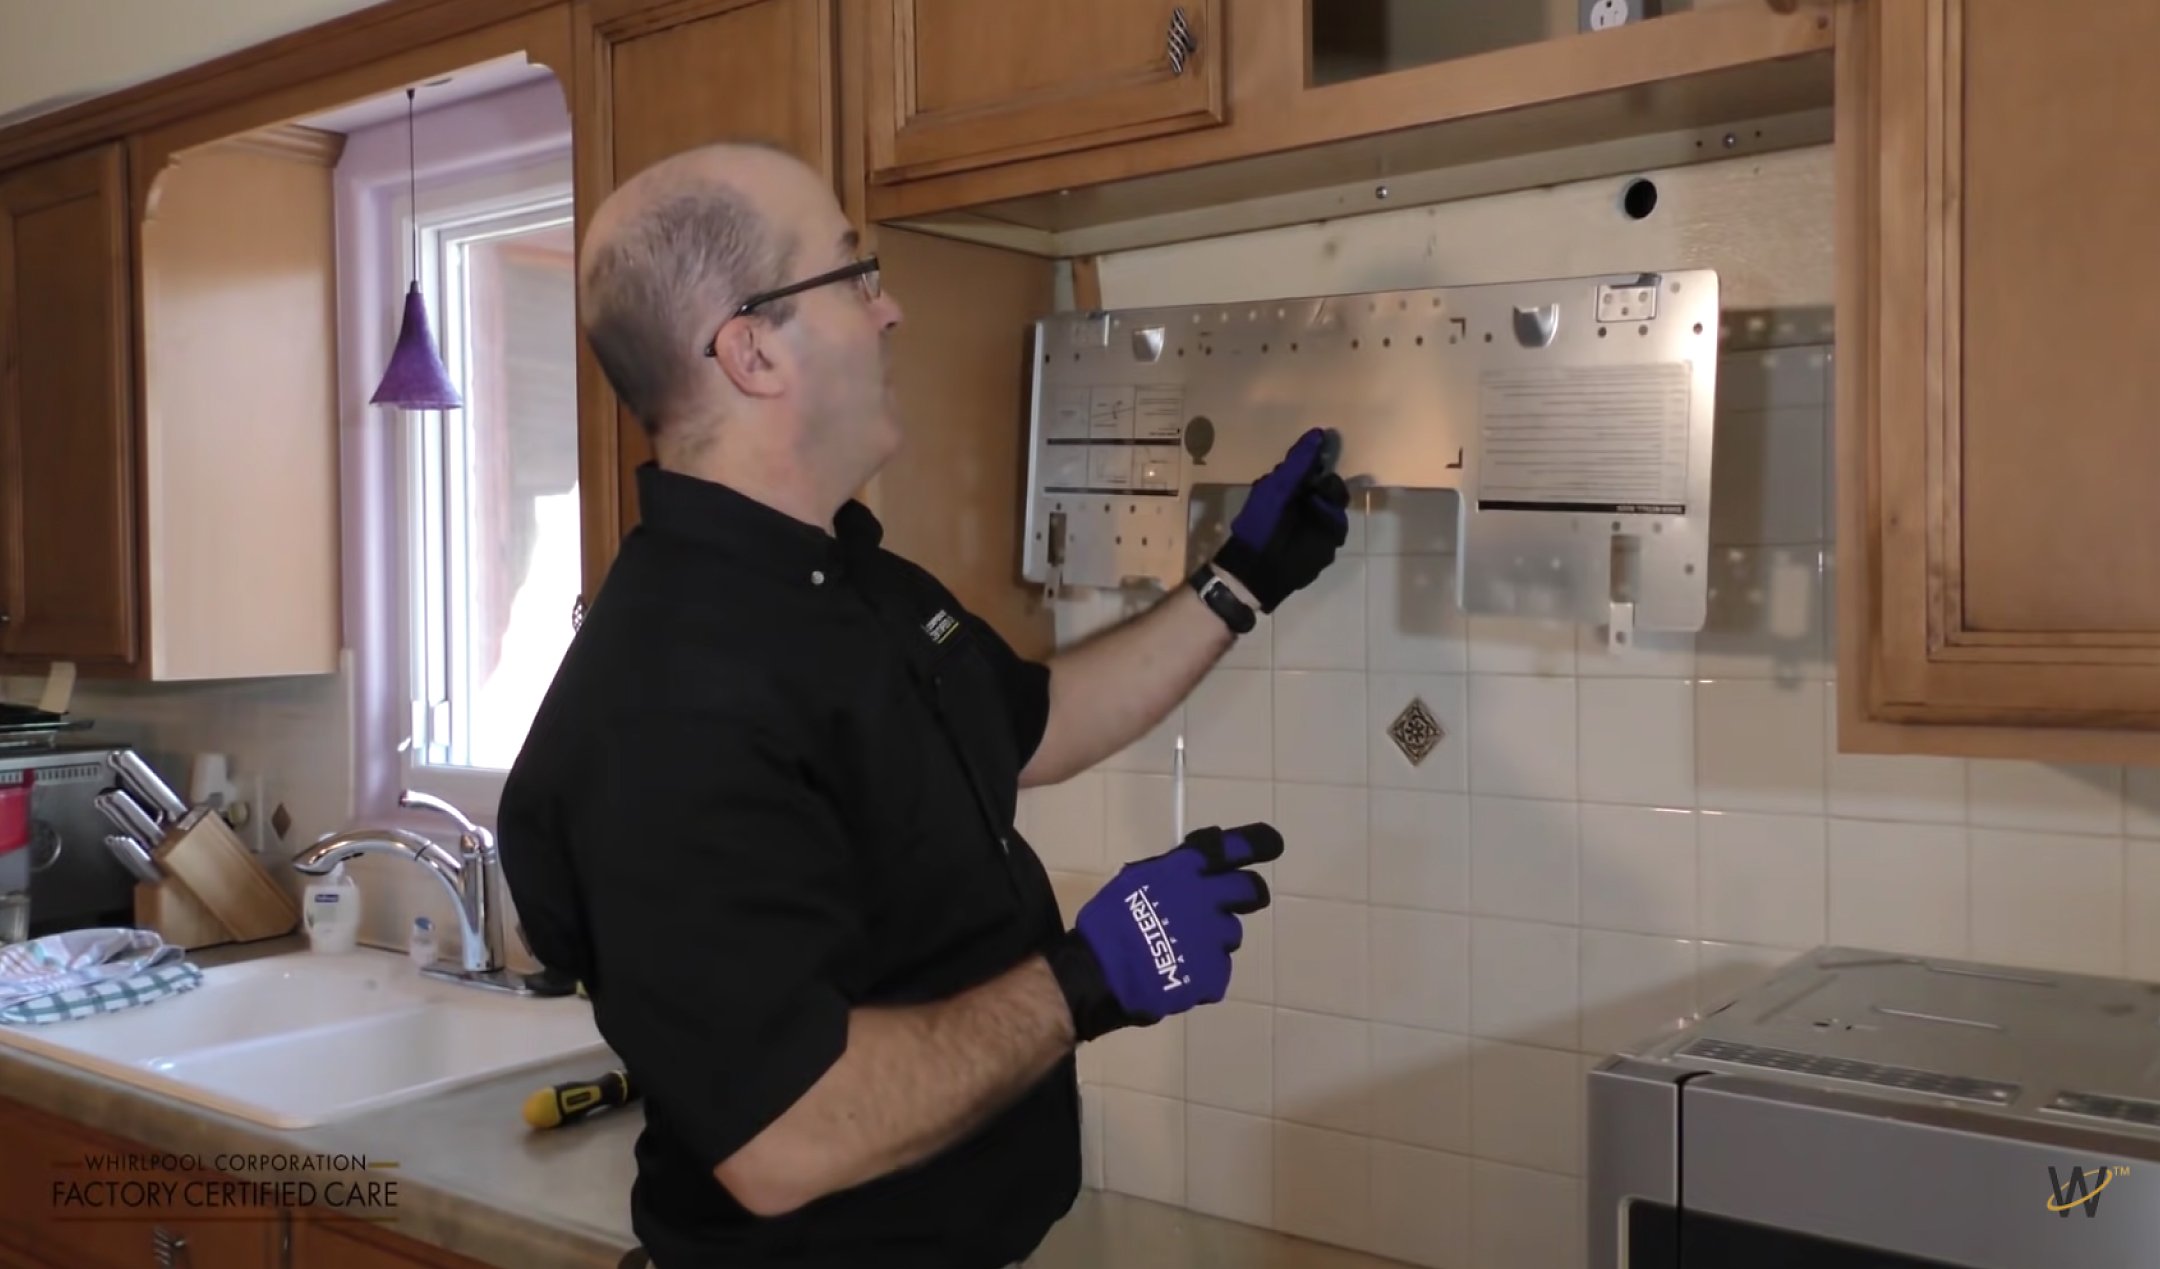 How to Replace an Over-the-Range Microwave